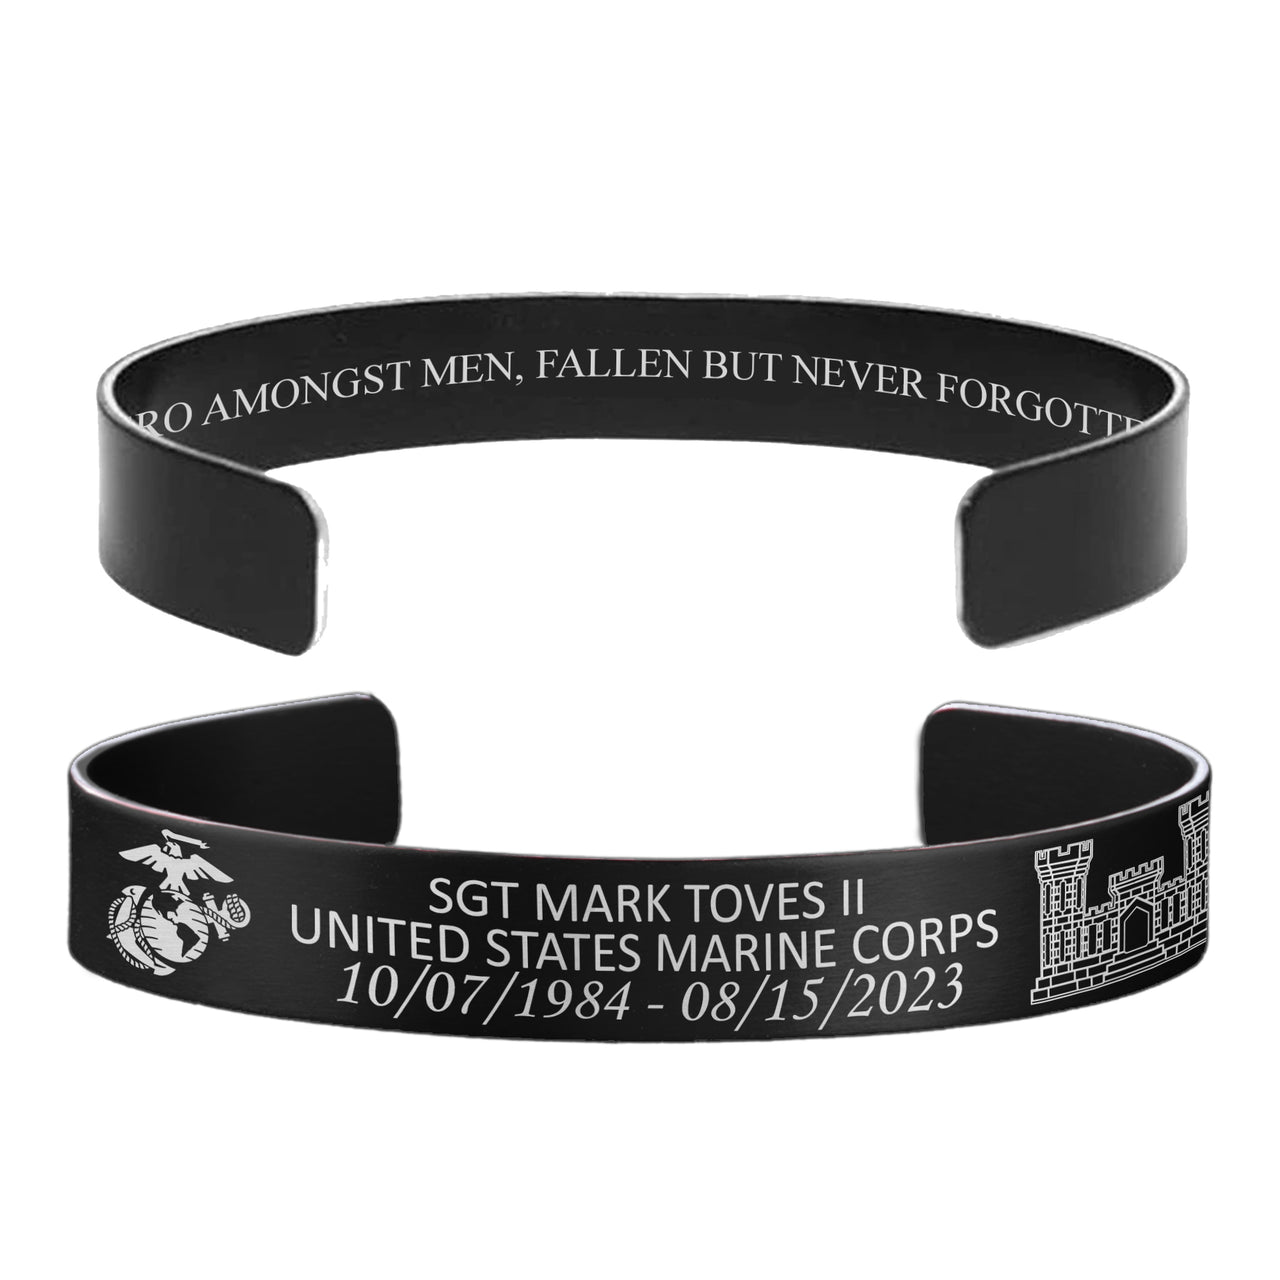 Sgt Mark Toves II Memorial Band – Hosted by the Toves Family